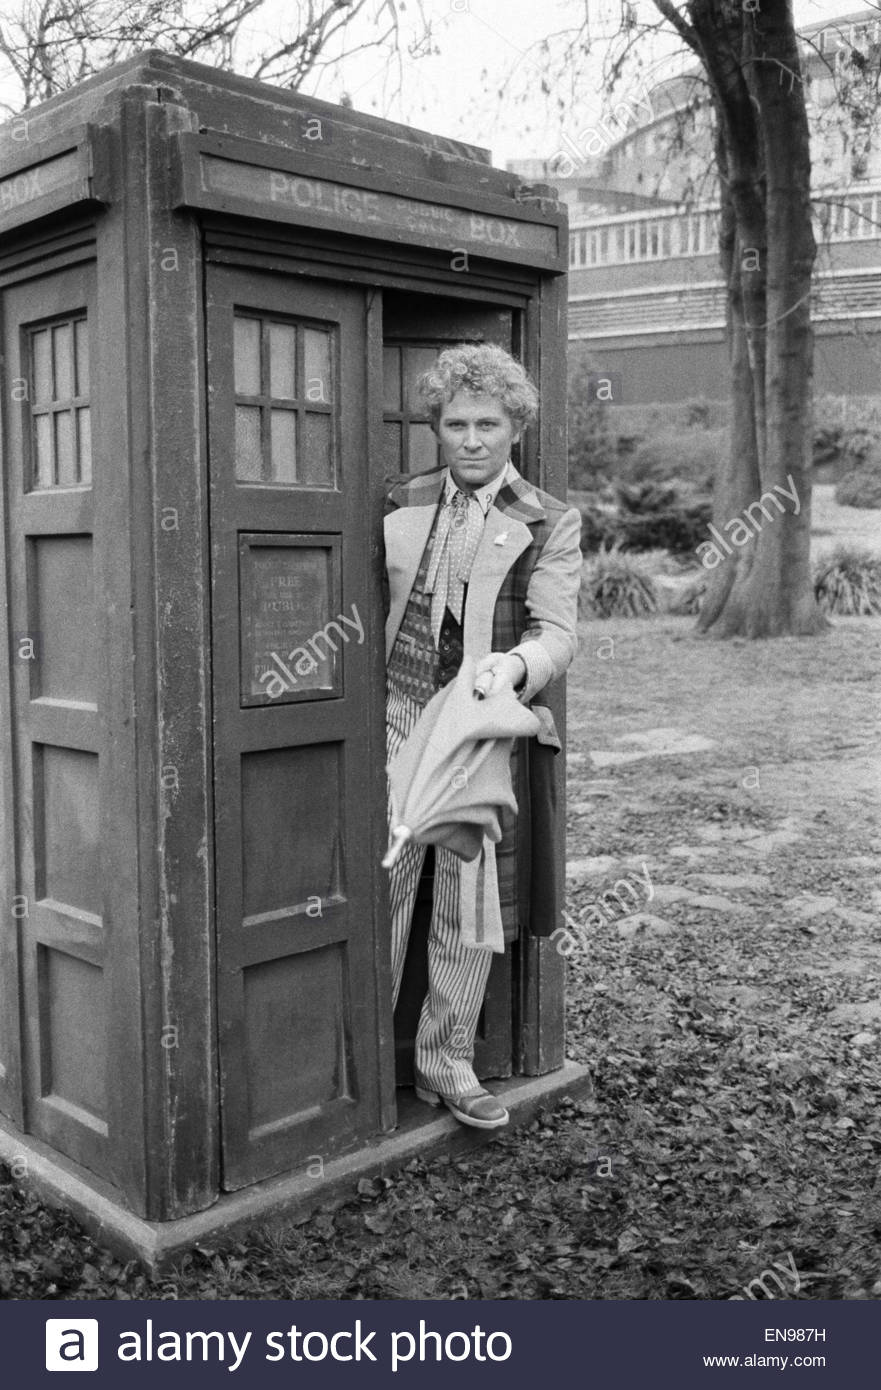 actor-colin-baker-recently-named-as-the-sixth-doctor-who-in-the-bbc-EN987H.jpg